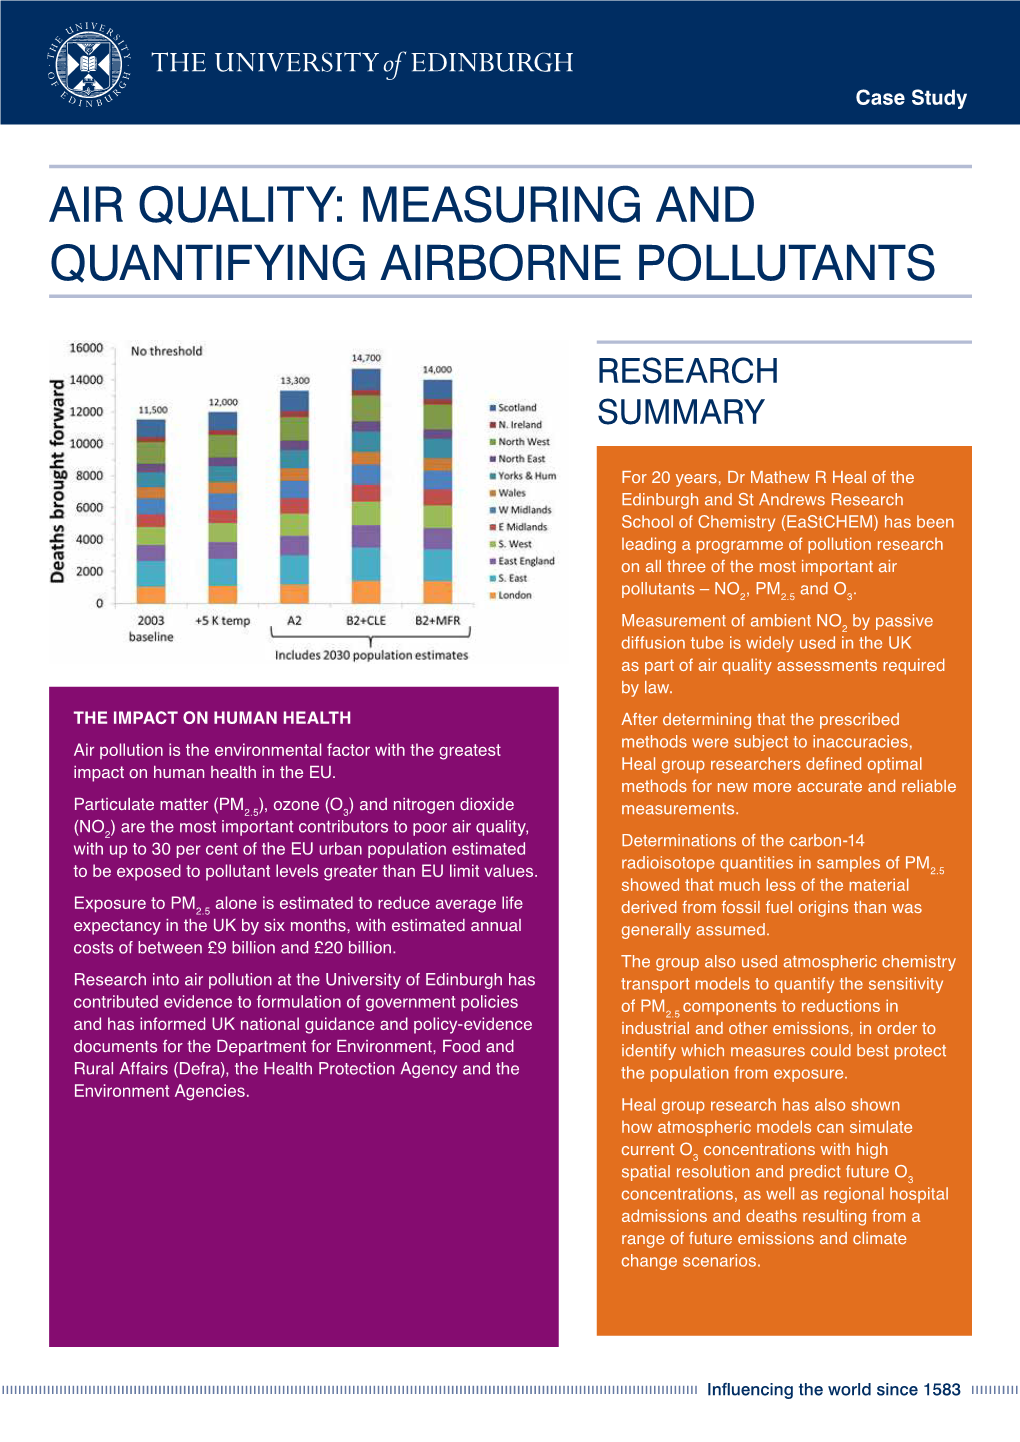 Air Quality: Measuring and Quantifying Airborne Pollutants